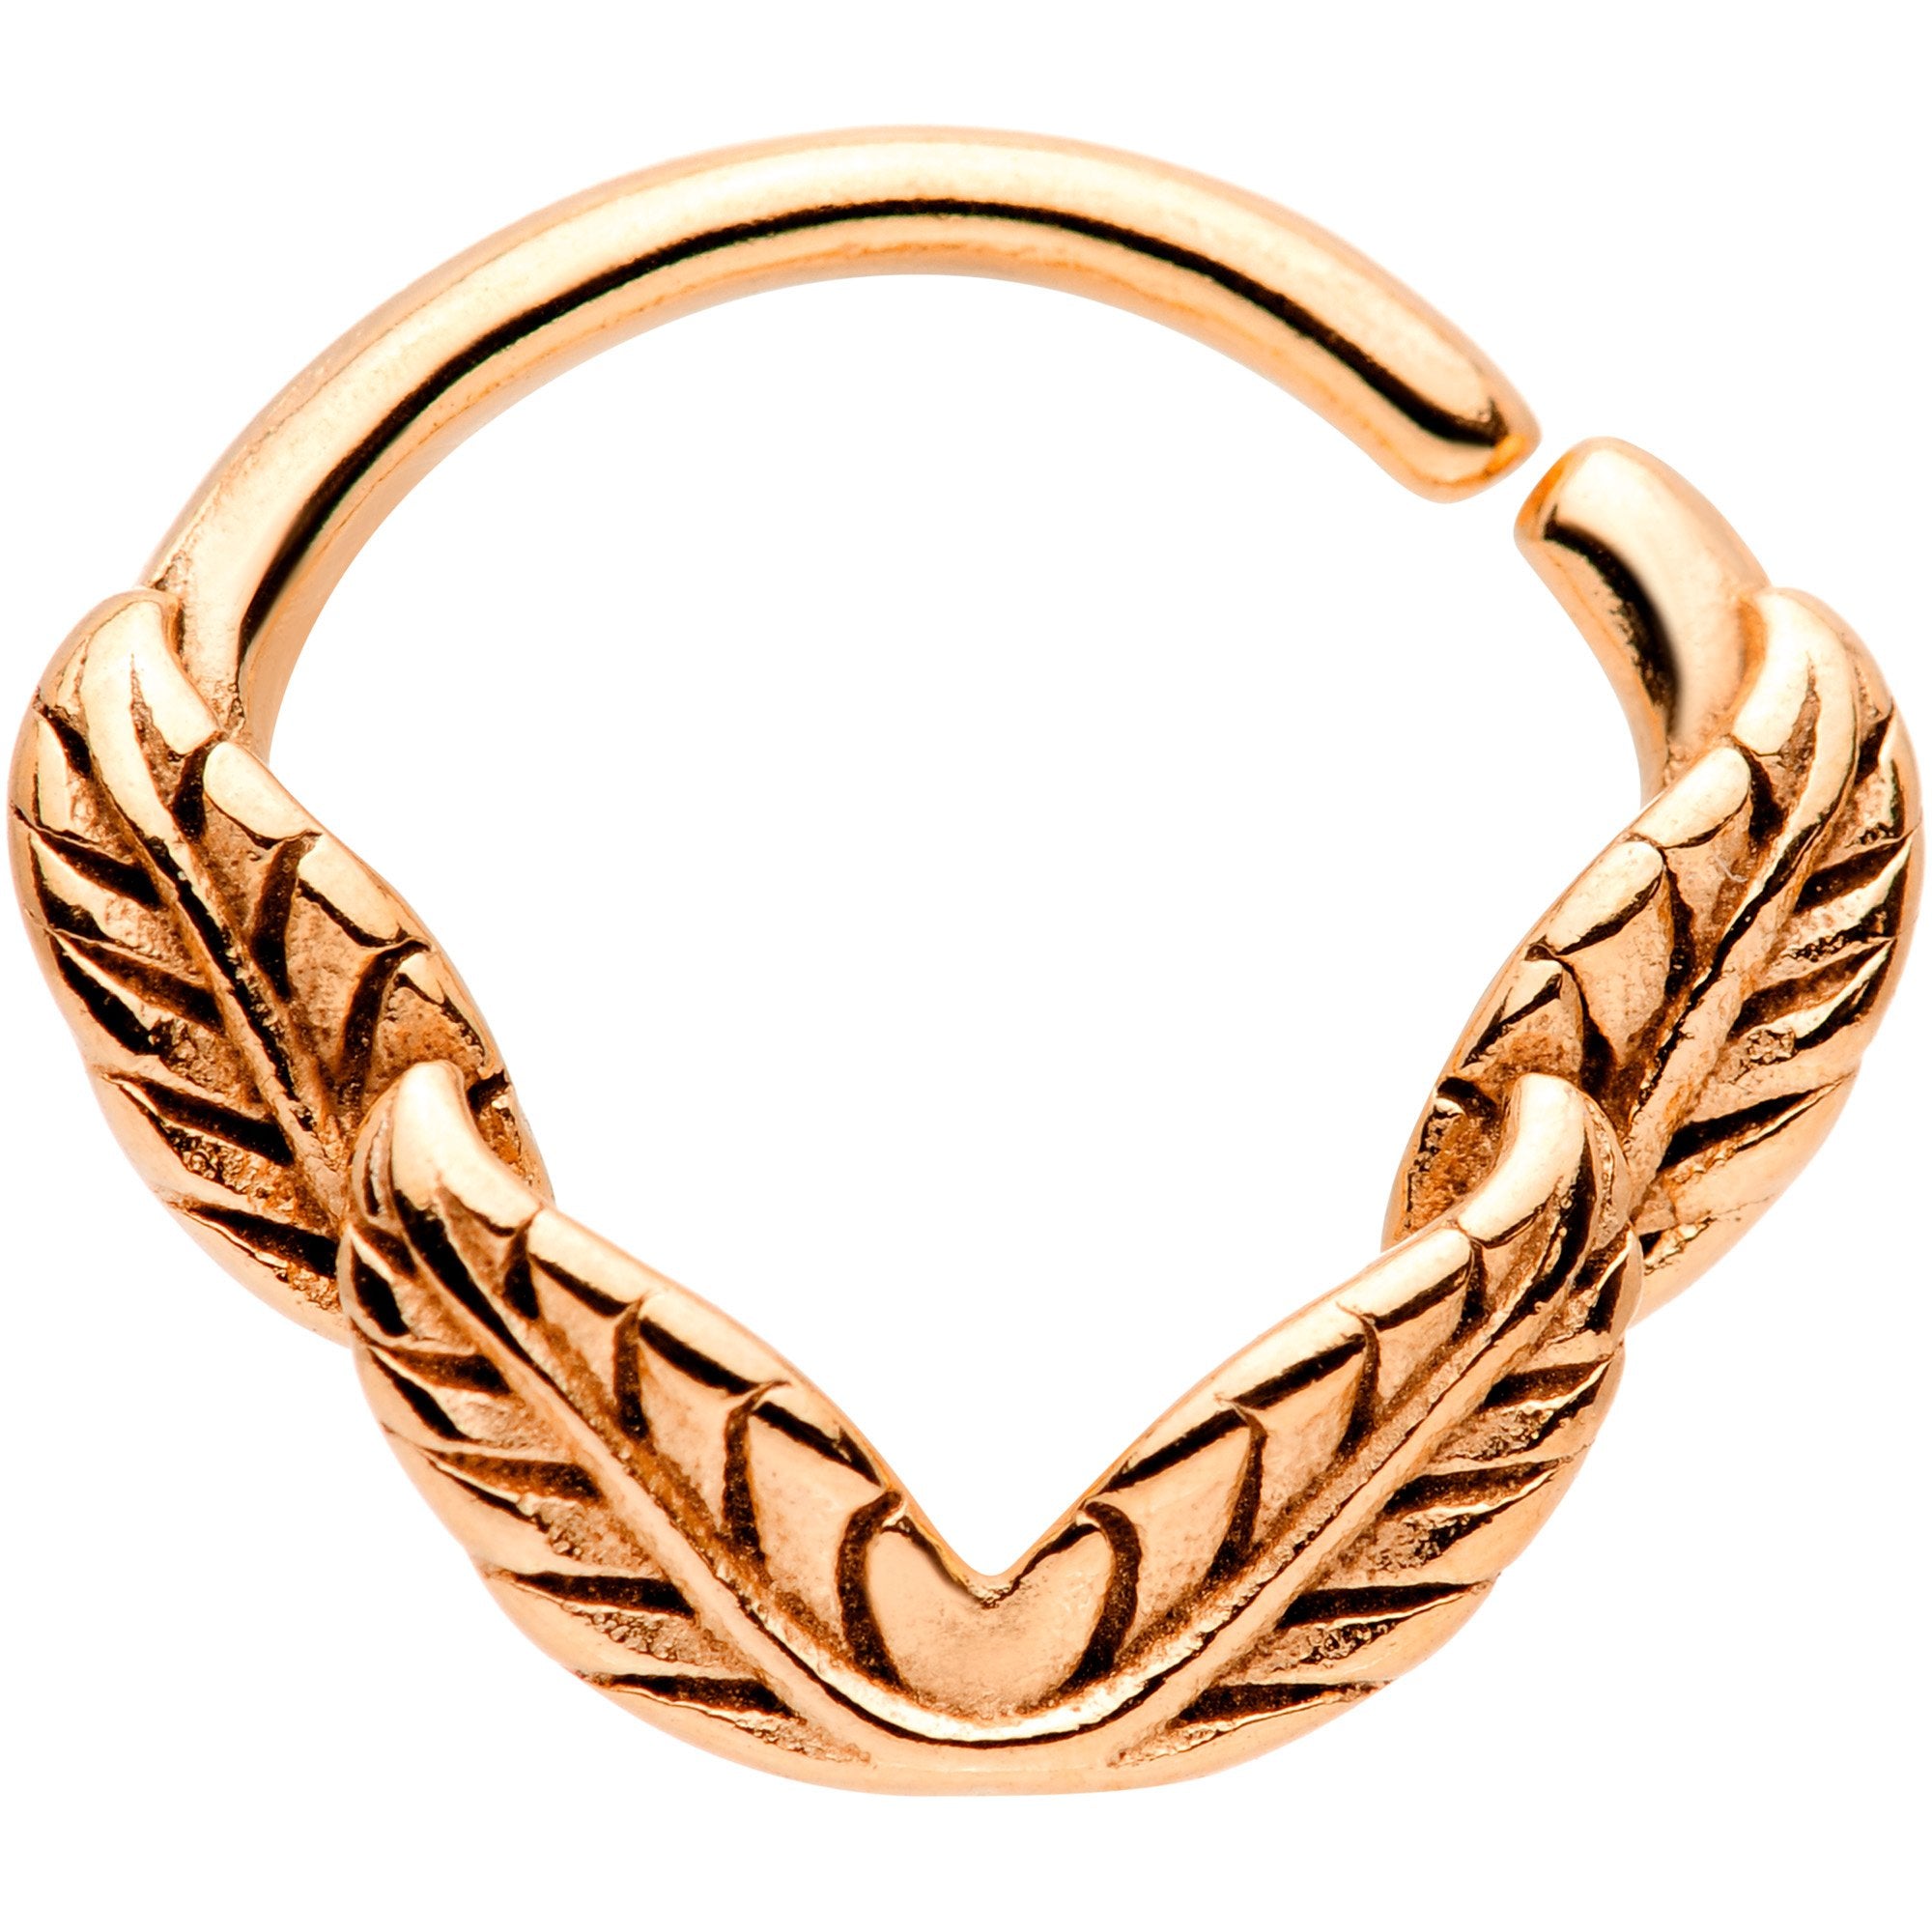 16 Gauge 3/8 Rose Gold Tone Ring of Feathers Closure Ring